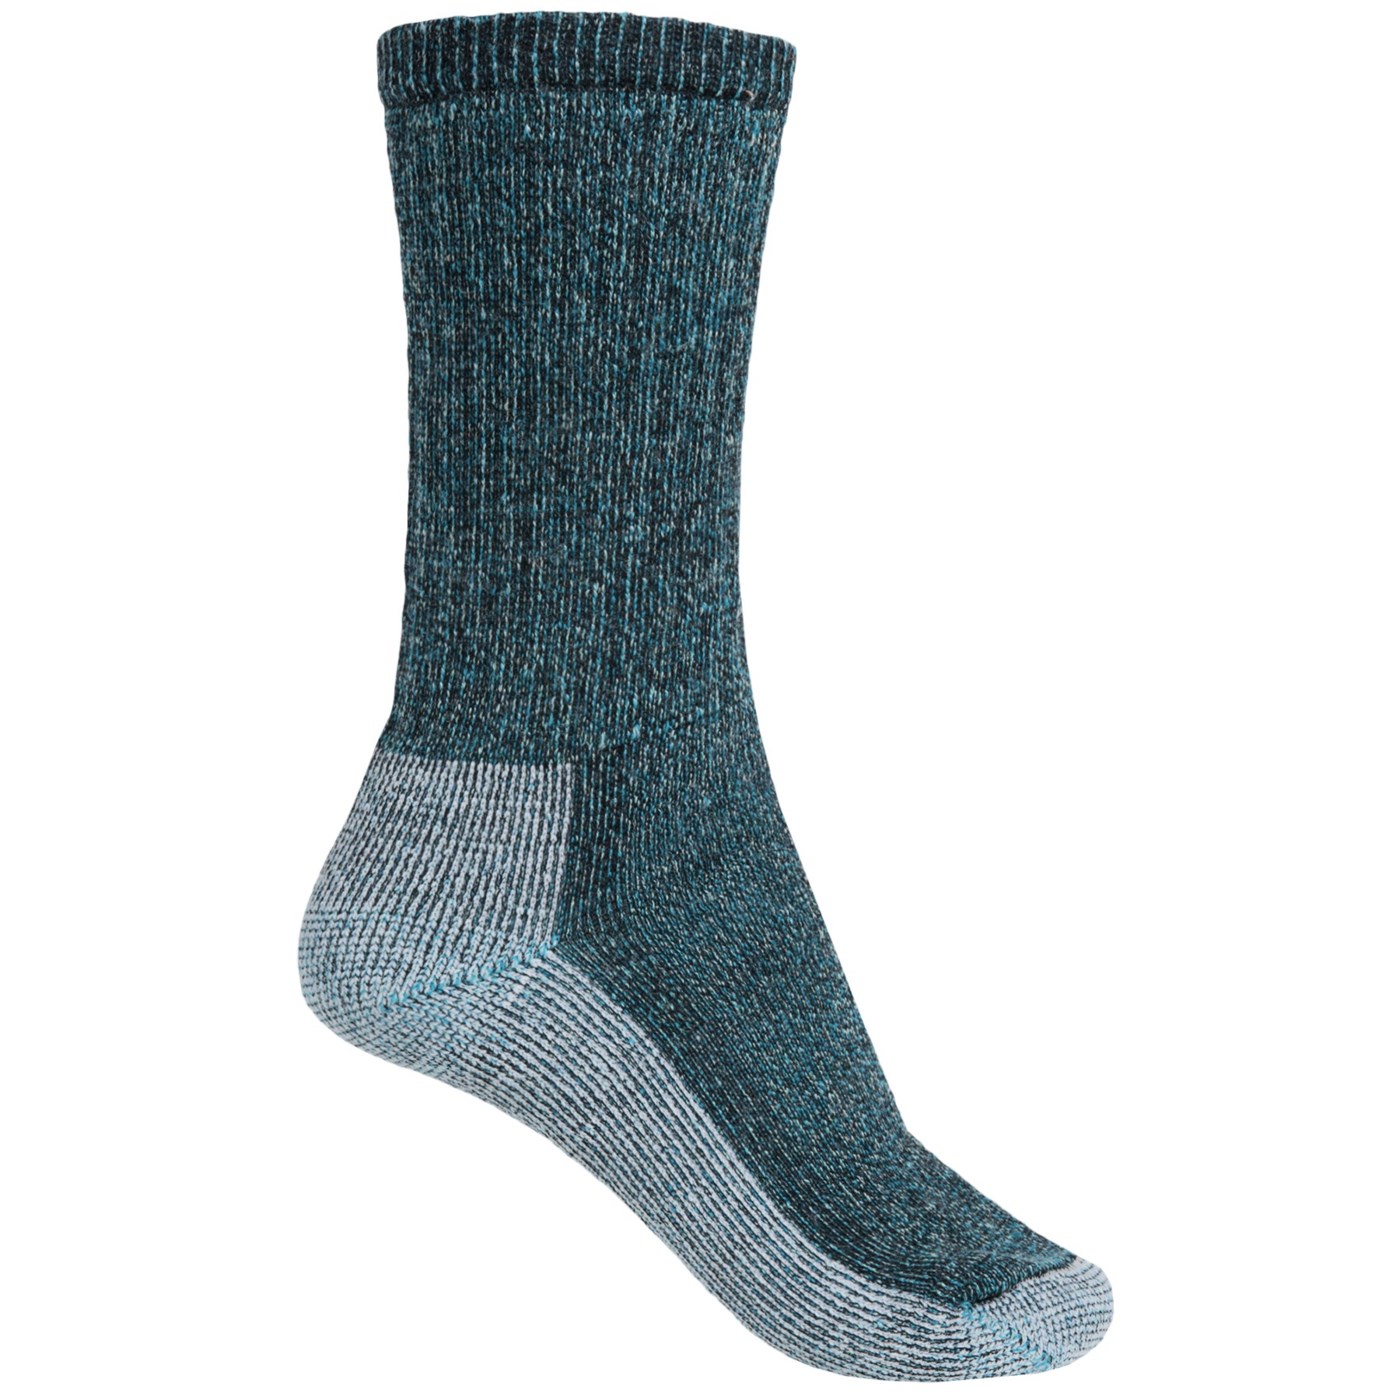 Good cushioning and warm   Review of SmartWool Hiking Crew Socks   Merino Wool (For Women) by Lee from PA on 5/4/2016